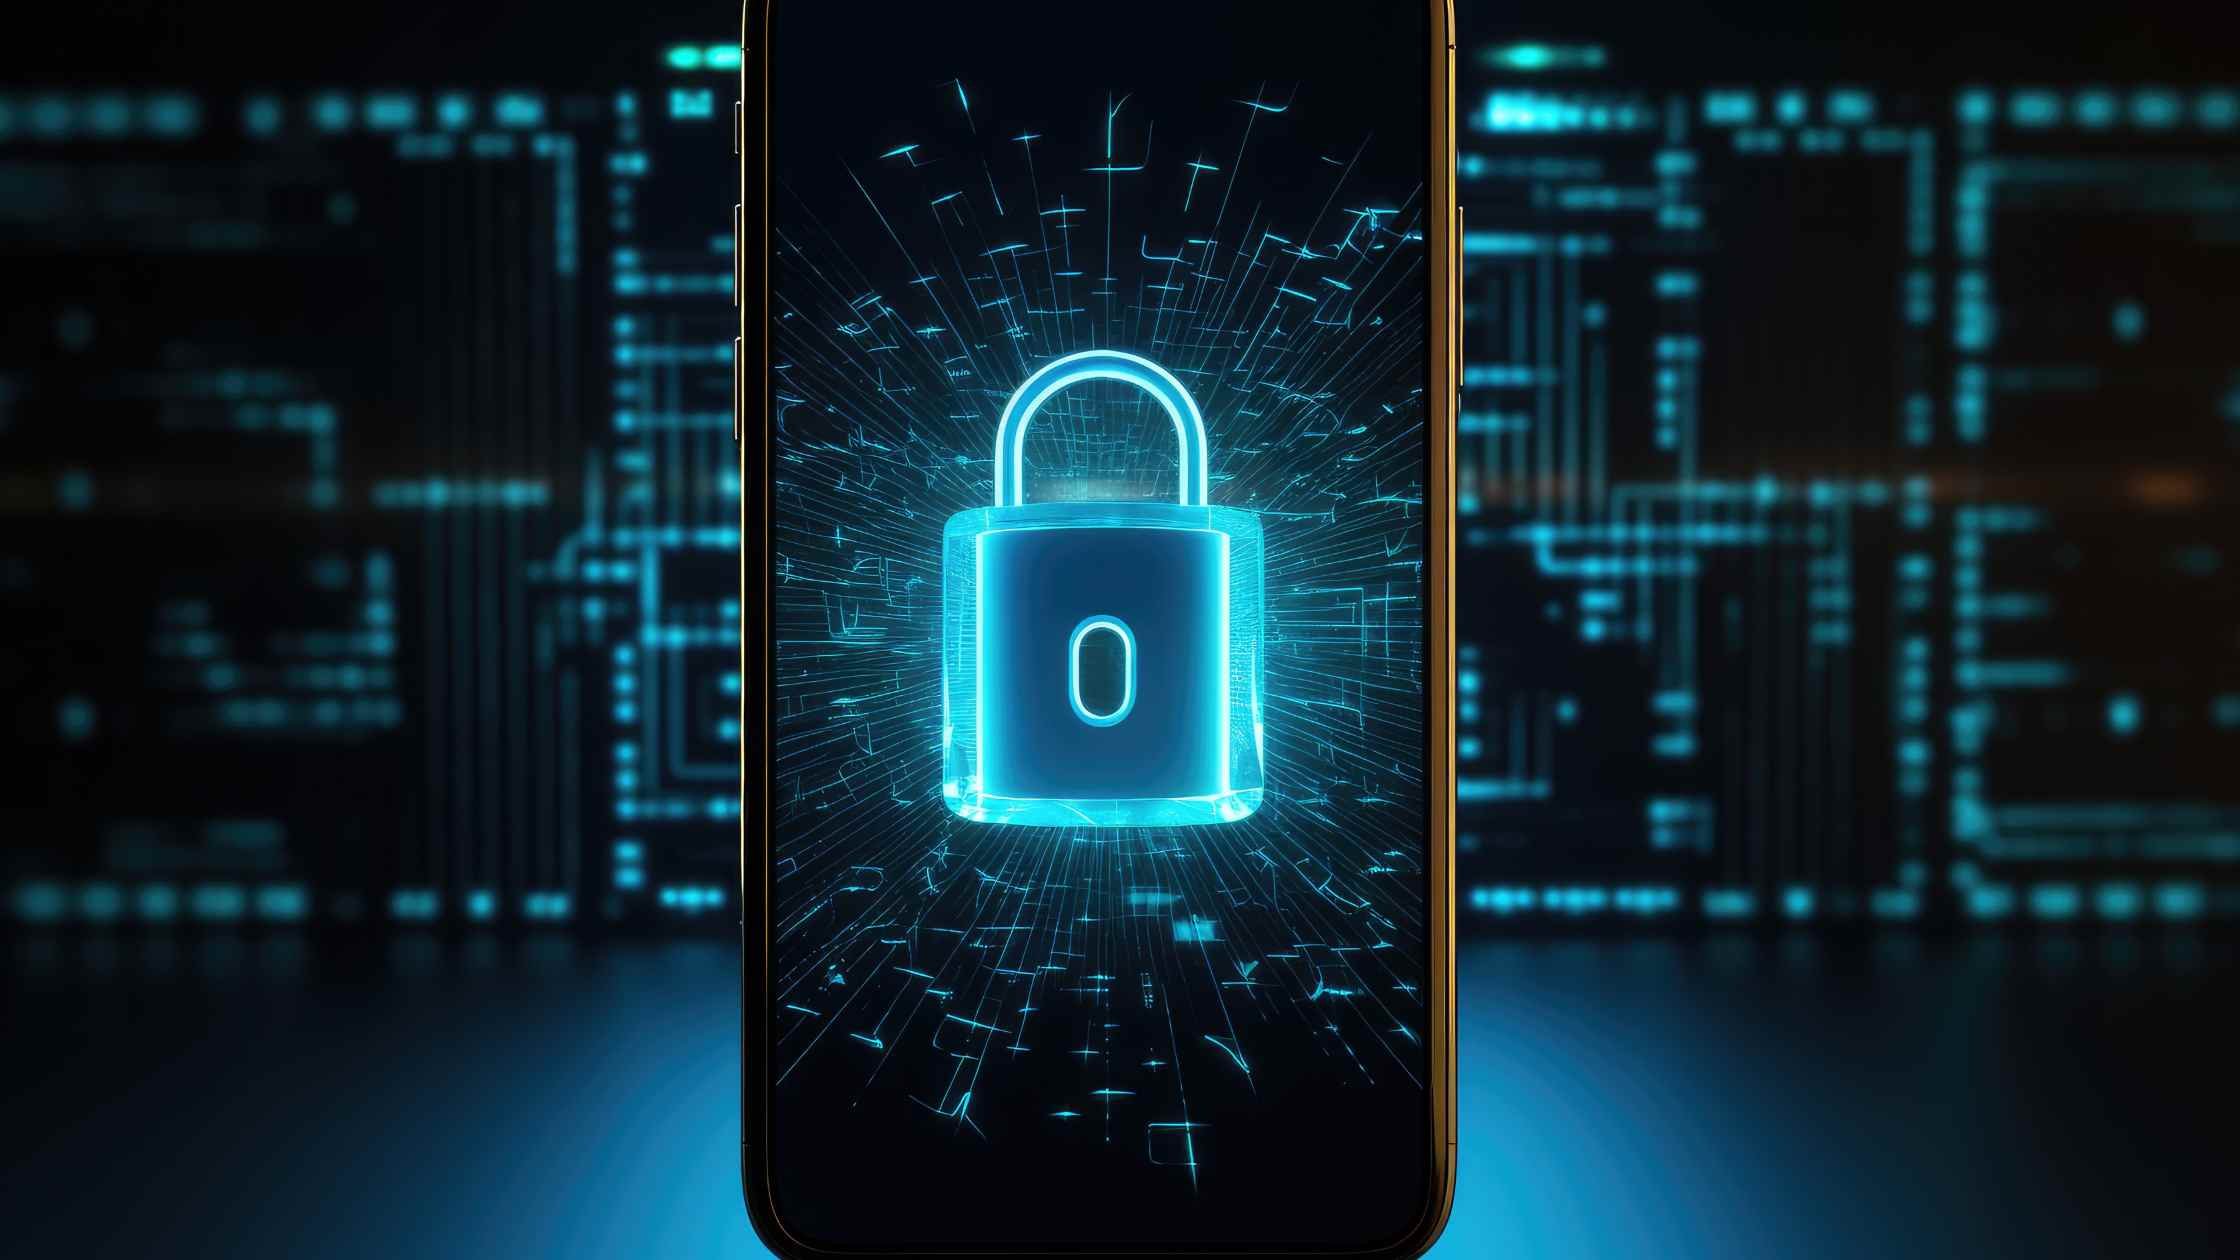 Mobile phone security concept; smartphone with padlock icon